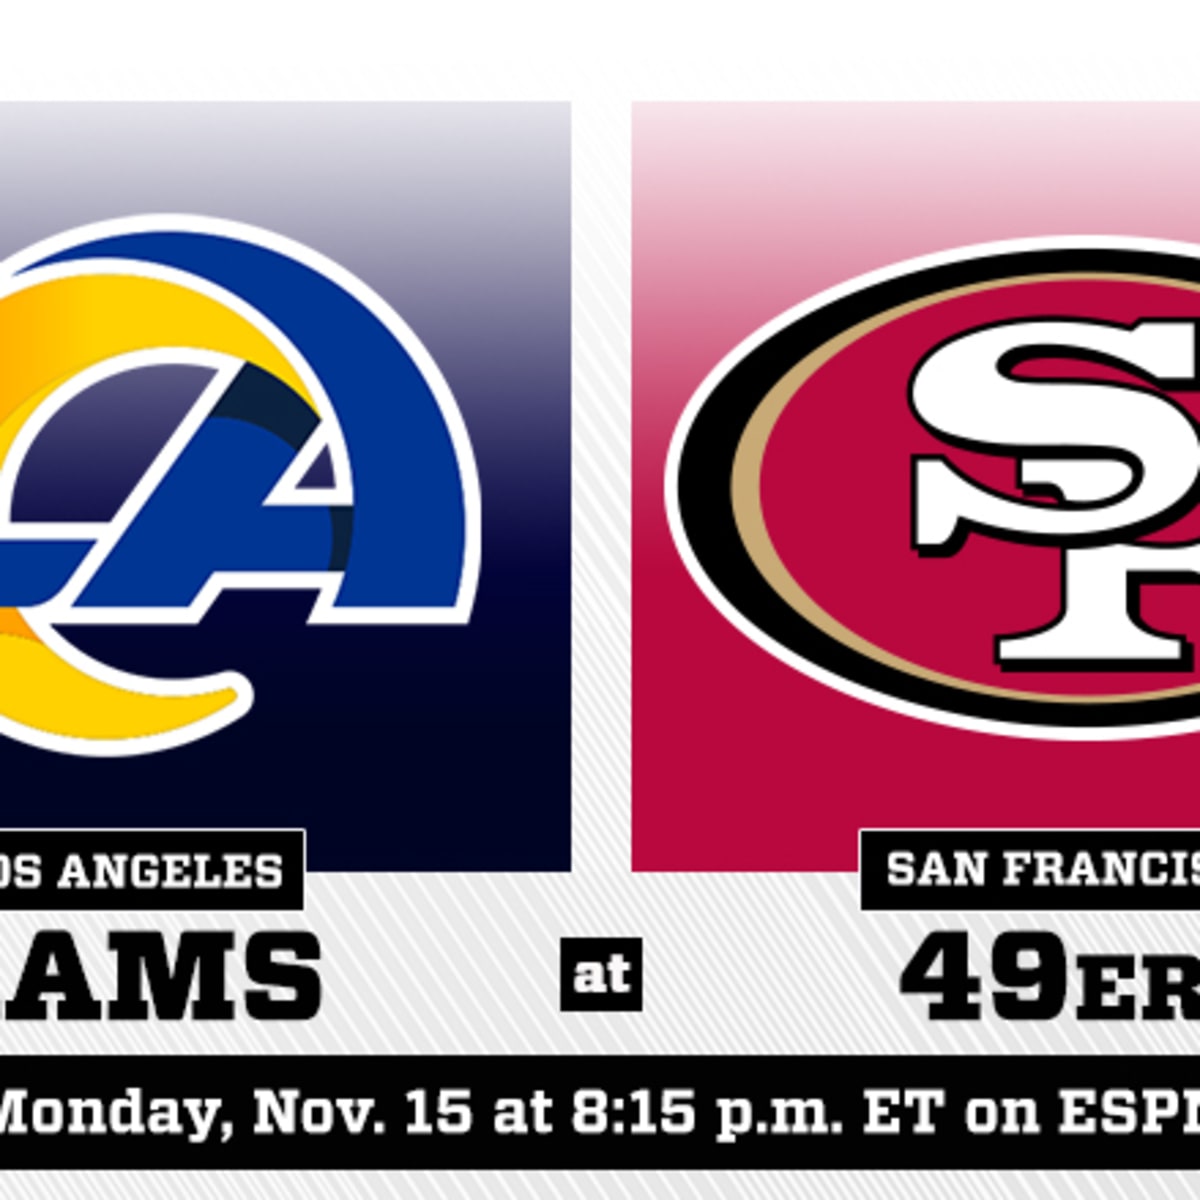 where can i watch the rams vs 49ers game